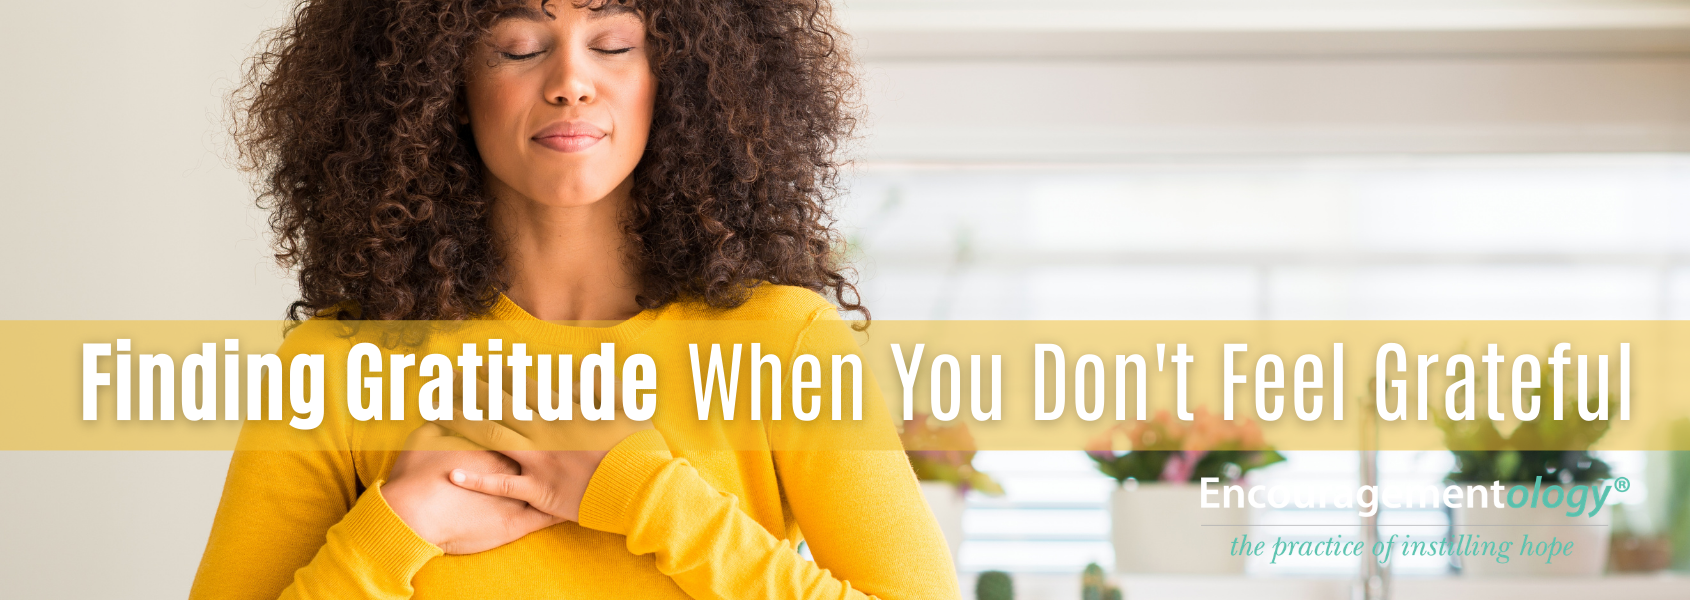 Finding Gratitude When You Don't Feel Grateful